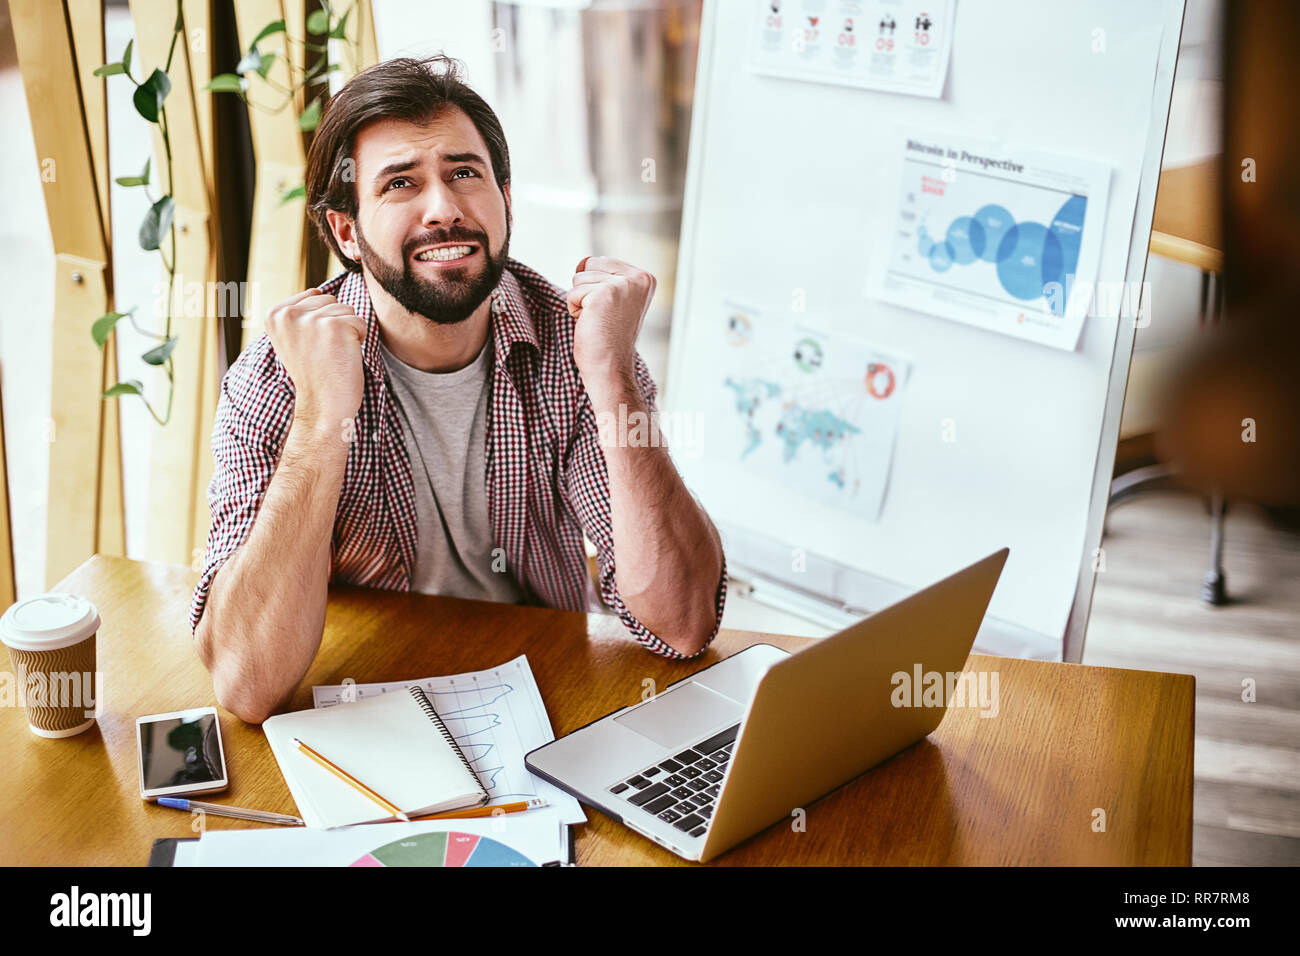 Emotional businessman sitting with a laptop computer waiting in tension for online result, nervous man, office employee clenching fists feeling enthusiastic cheering, supporting, hope for win concept Stock Photo